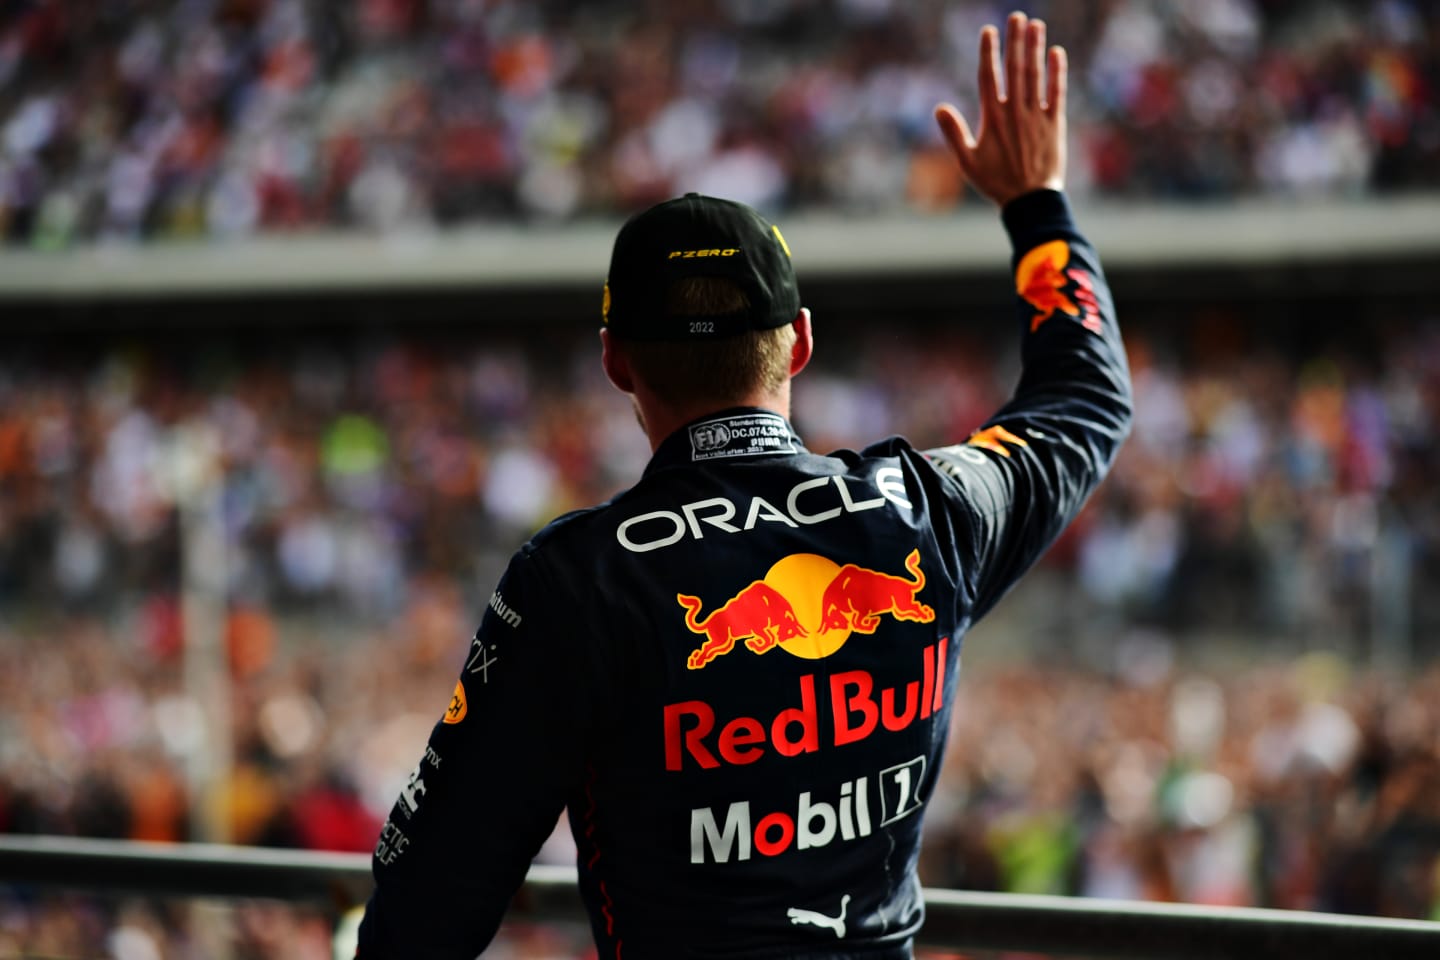 AUSTIN, TEXAS - OCTOBER 23: Race winner Max Verstappen of the Netherlands and Oracle Red Bull Racing celebrates on the podium following the F1 Grand Prix of USA at Circuit of The Americas on October 23, 2022 in Austin, Texas. (Photo by Mario Renzi - Formula 1/Formula 1 via Getty Images)